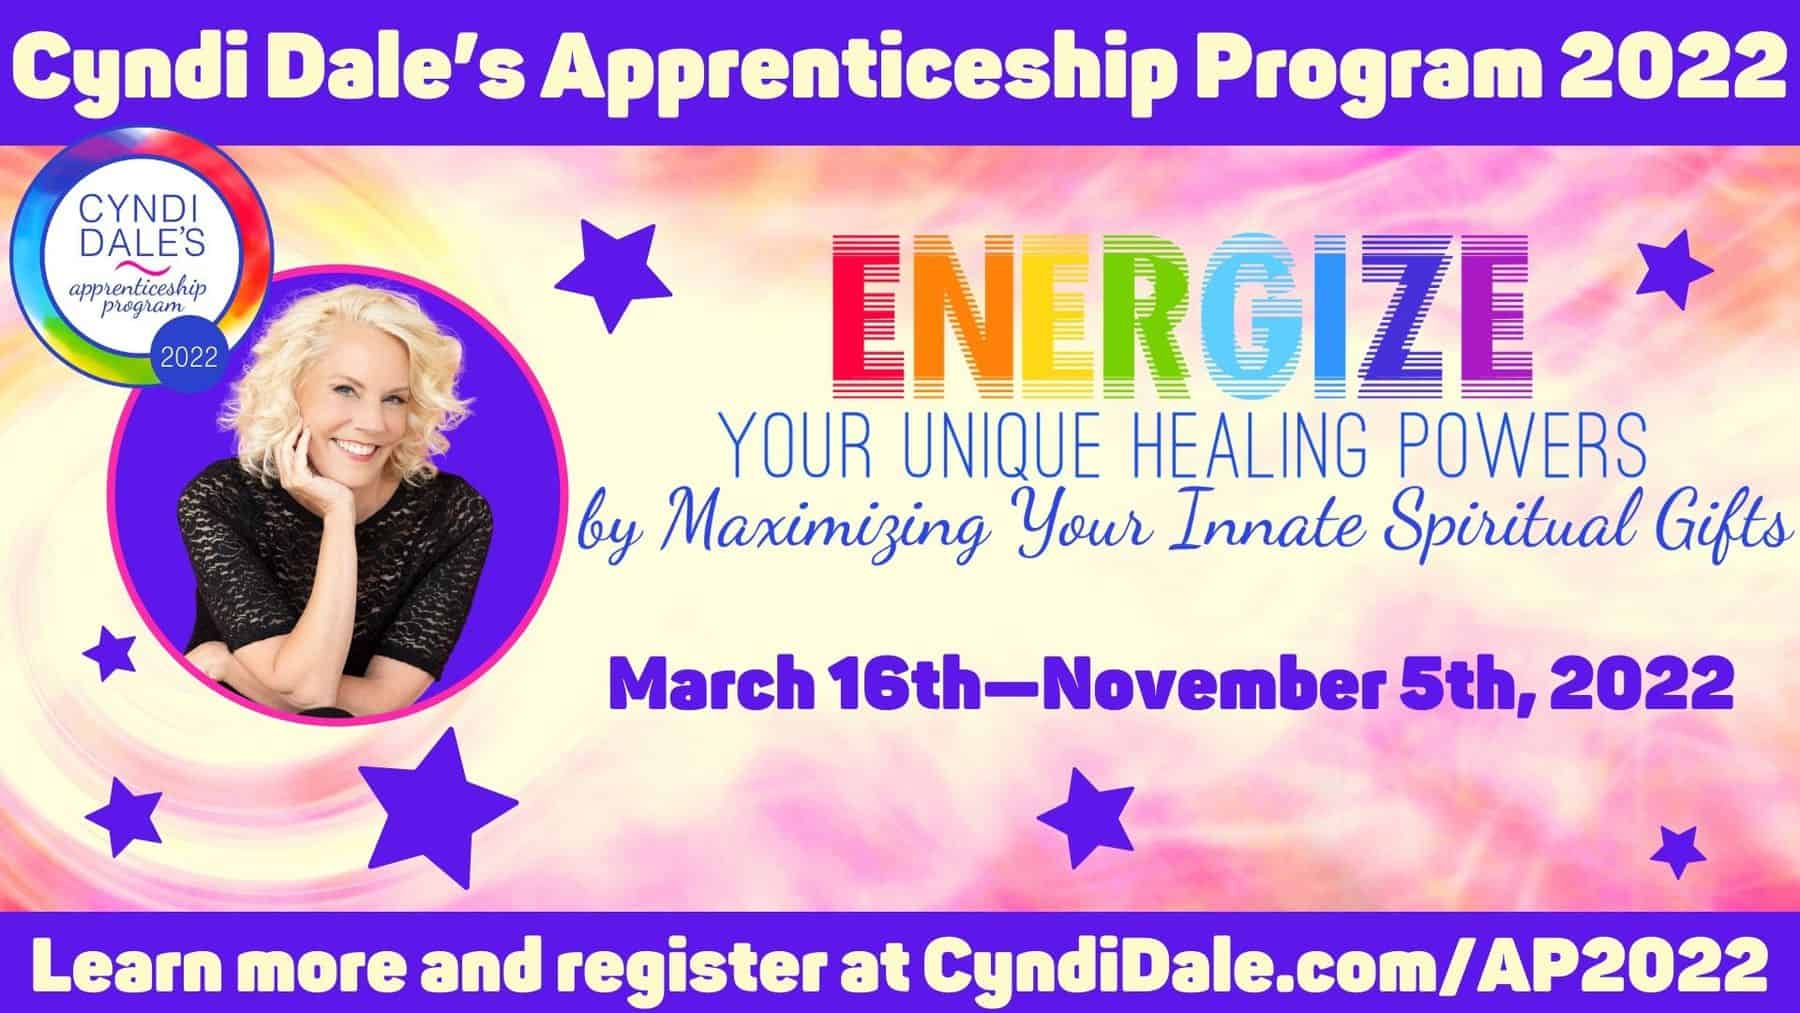 Cyndi Dale’s Apprenticeship Program 2022 Energize Your Unique Healing Powers by Maximizing Your Innate Spiritual Gifts March 16th, 2022—November 5th, 2022